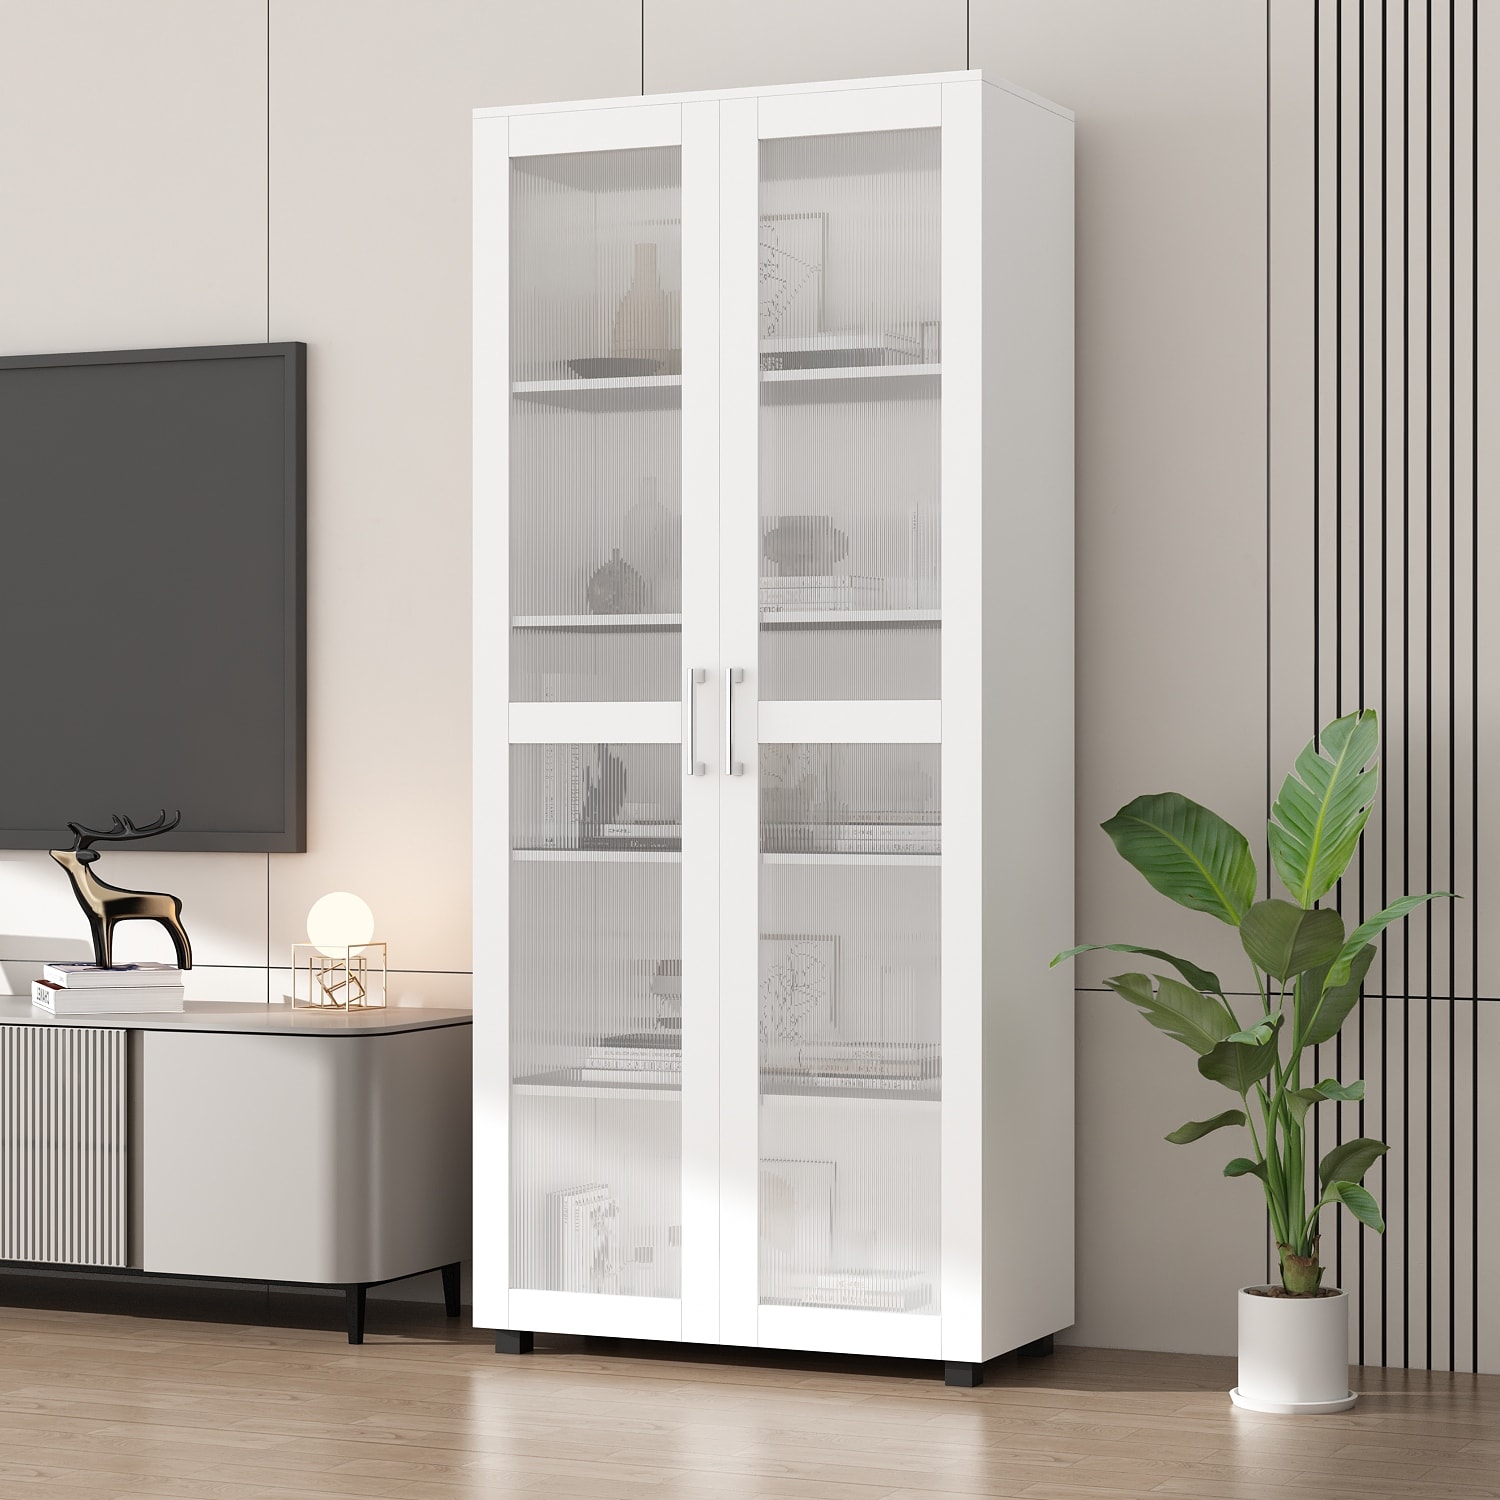 Timechee Tall Bookcase Storage Cabinet Acrylic Doors 5-Tier Display Cabinet